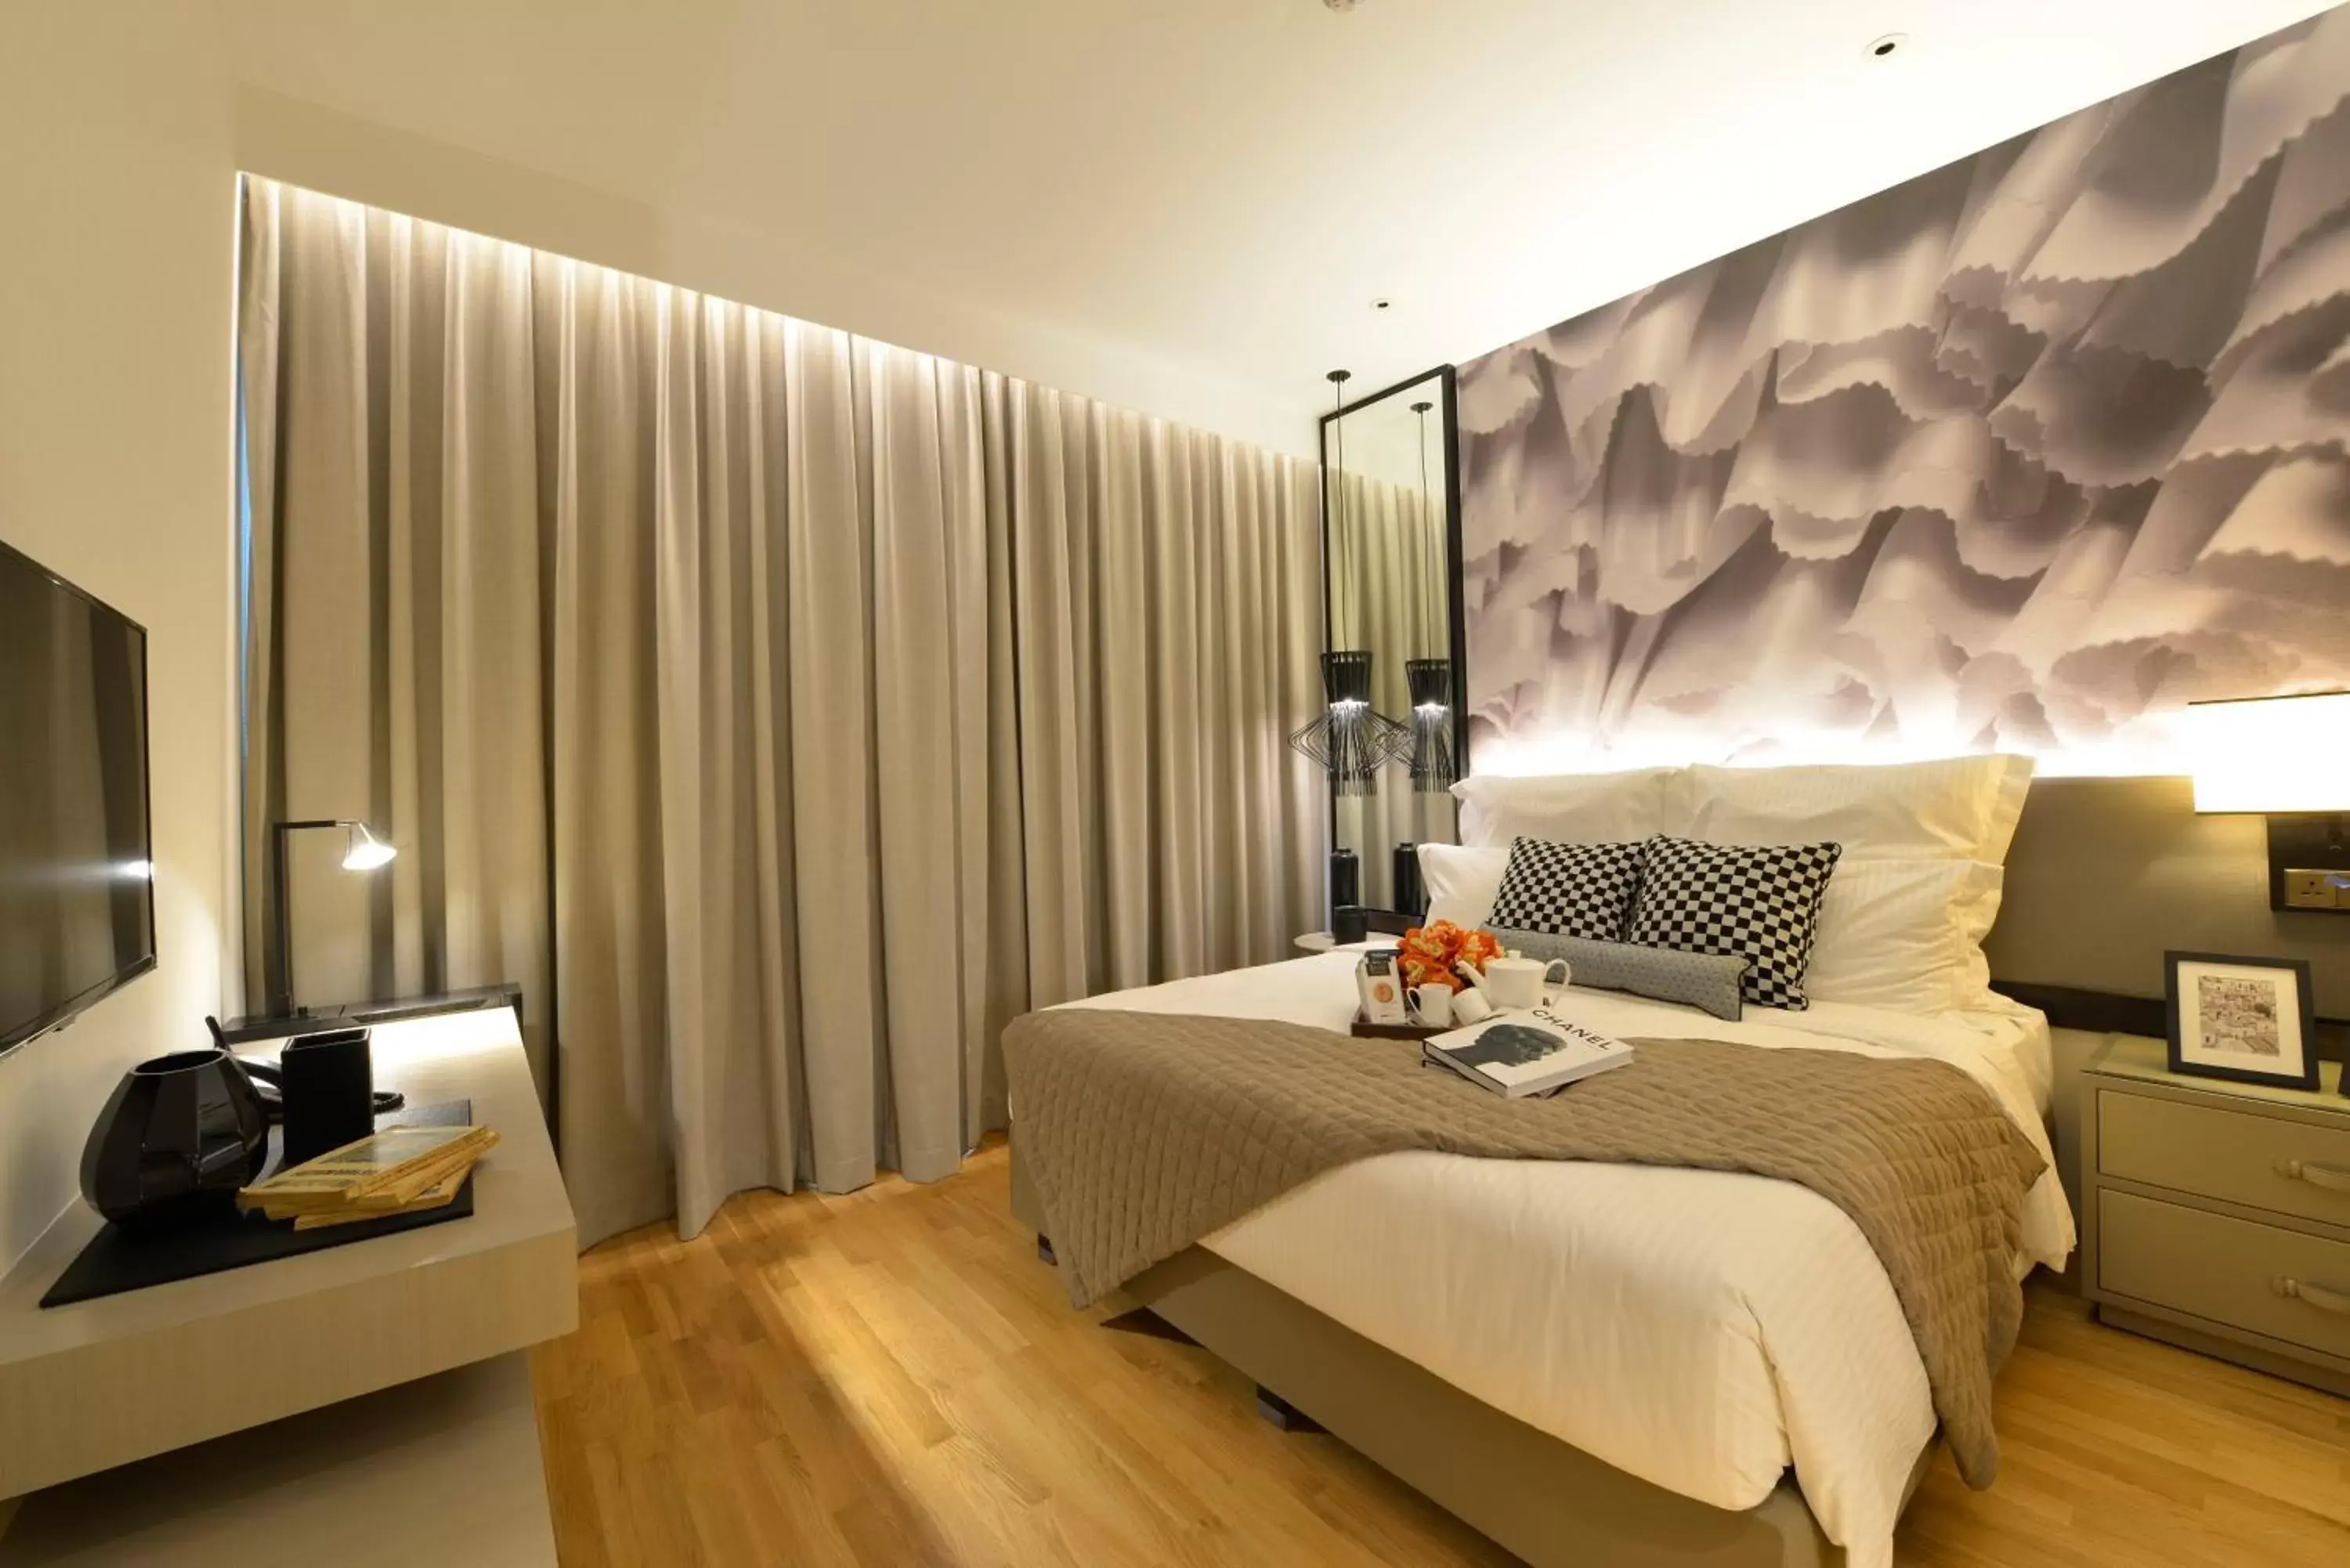 Bedroom, Room Photo in Ascott Orchard Singapore